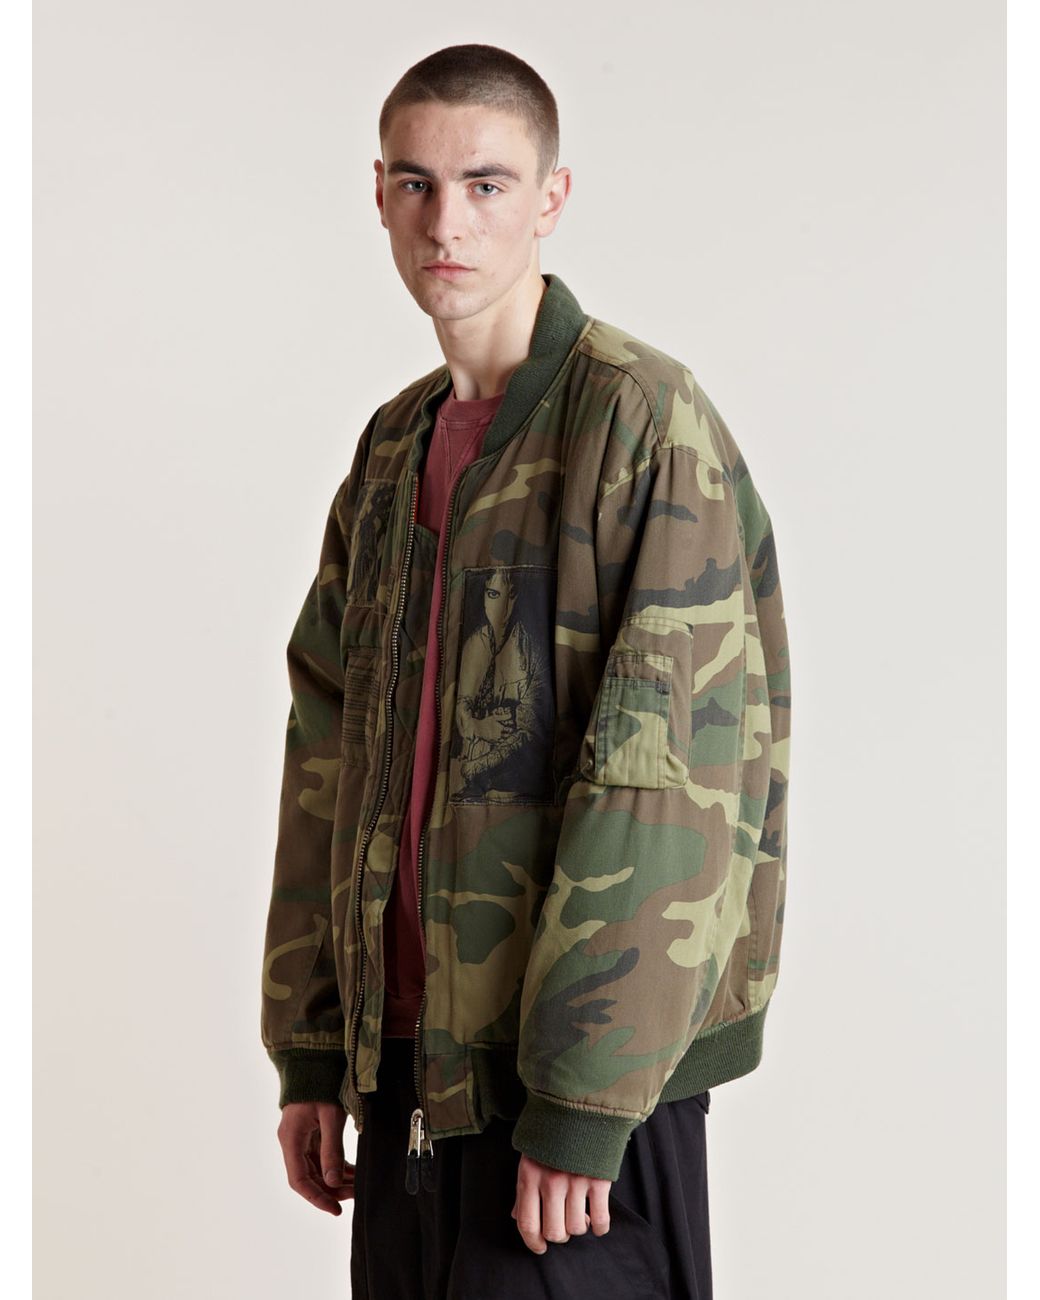 Raf Simons AW01 Camouflage Bomber Jacket in Green for Men | Lyst Canada